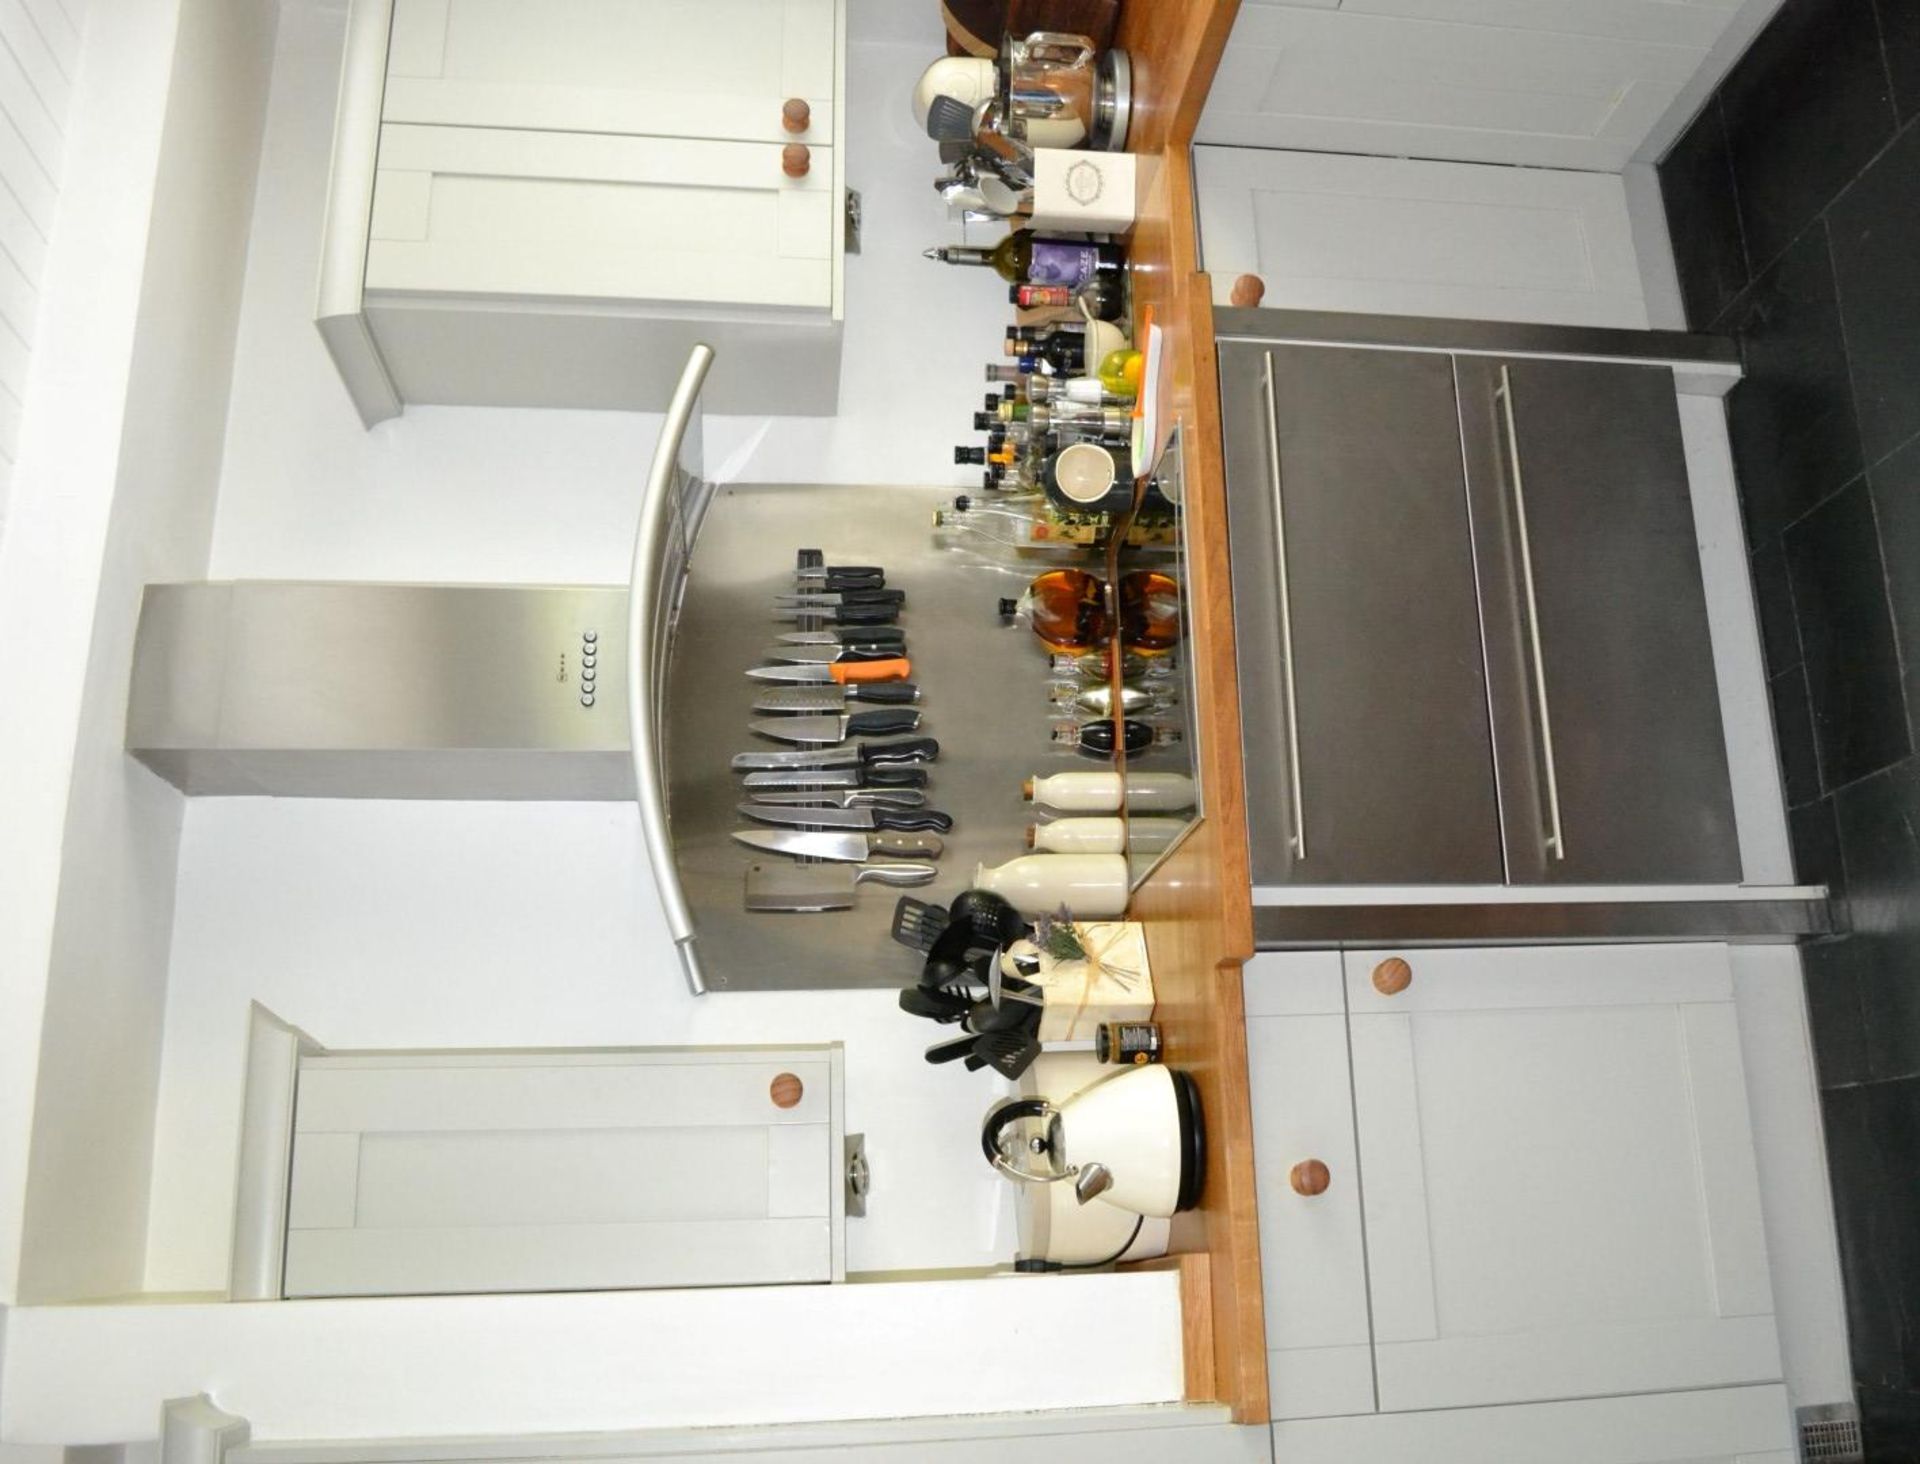 1 x Large Bespoke Fitted Kitchen With Neff Appliances - CL321 - Location: - Image 16 of 59